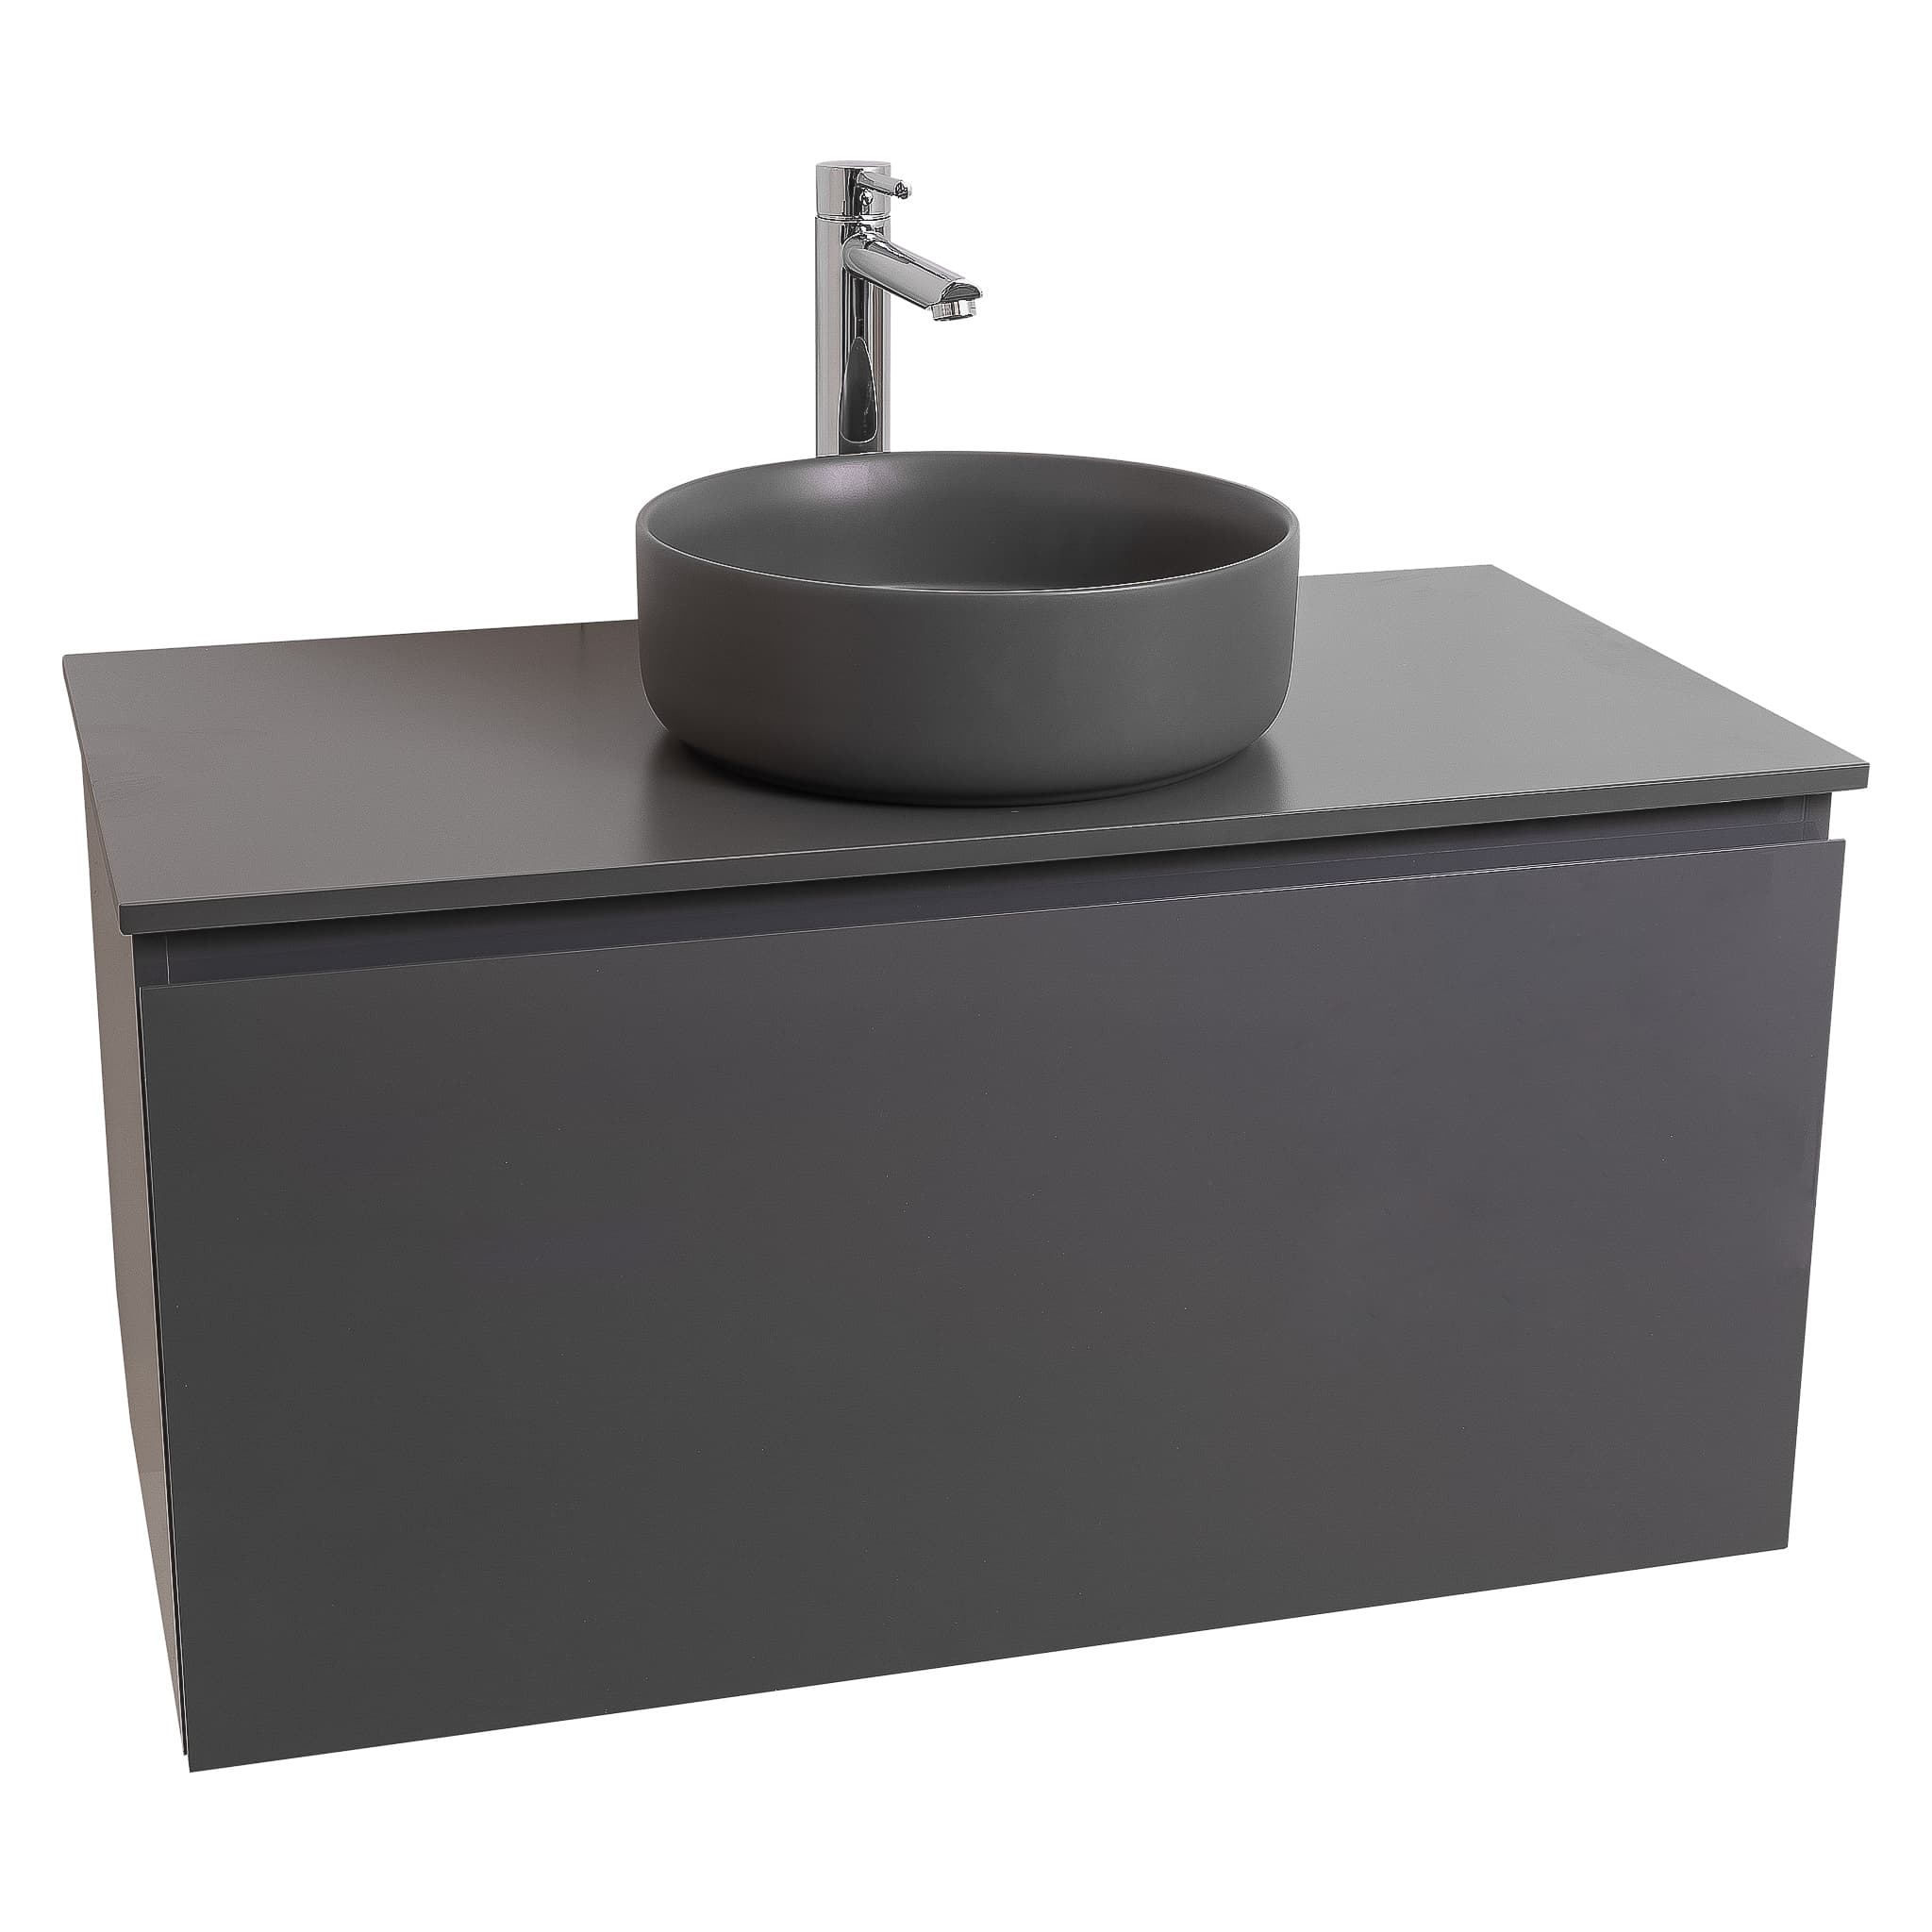 Venice 39.5 Anthracite High Gloss Cabinet, Ares Grey Ceniza Top And Ares Grey Ceniza Ceramic Basin, Wall Mounted Modern Vanity Set